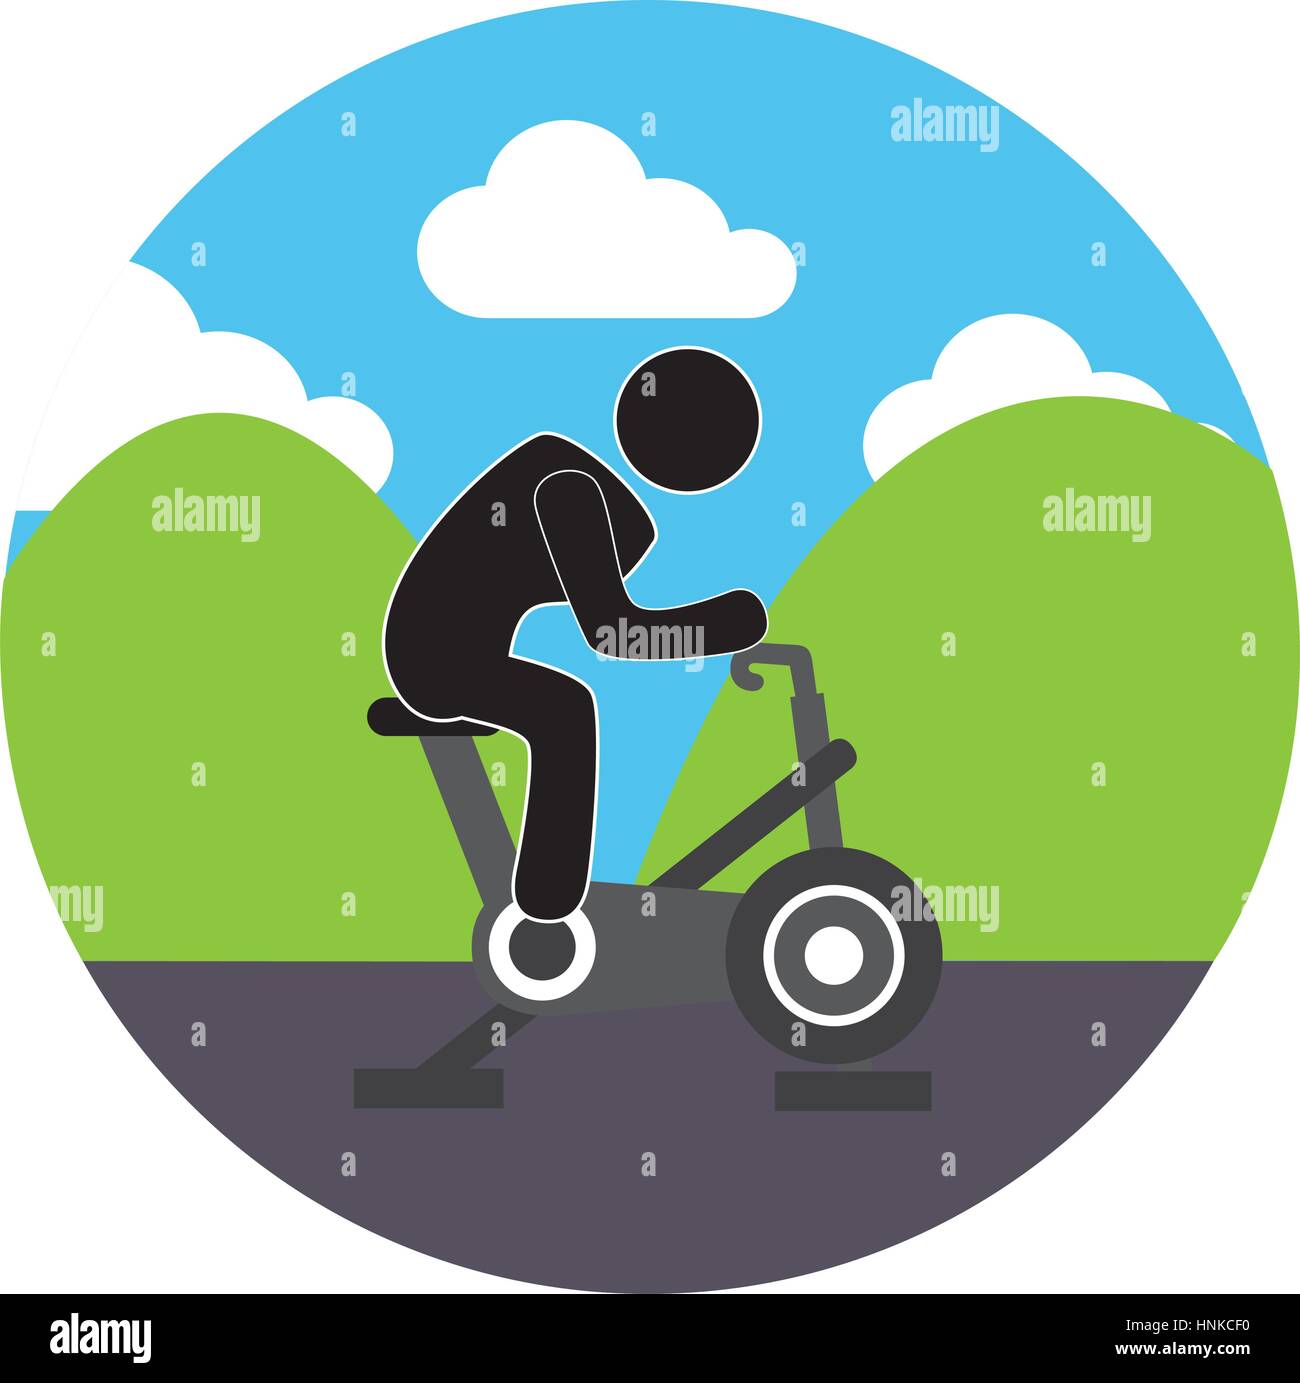 colorful circular landscape with man in spinning bike vector illustration Stock Vector